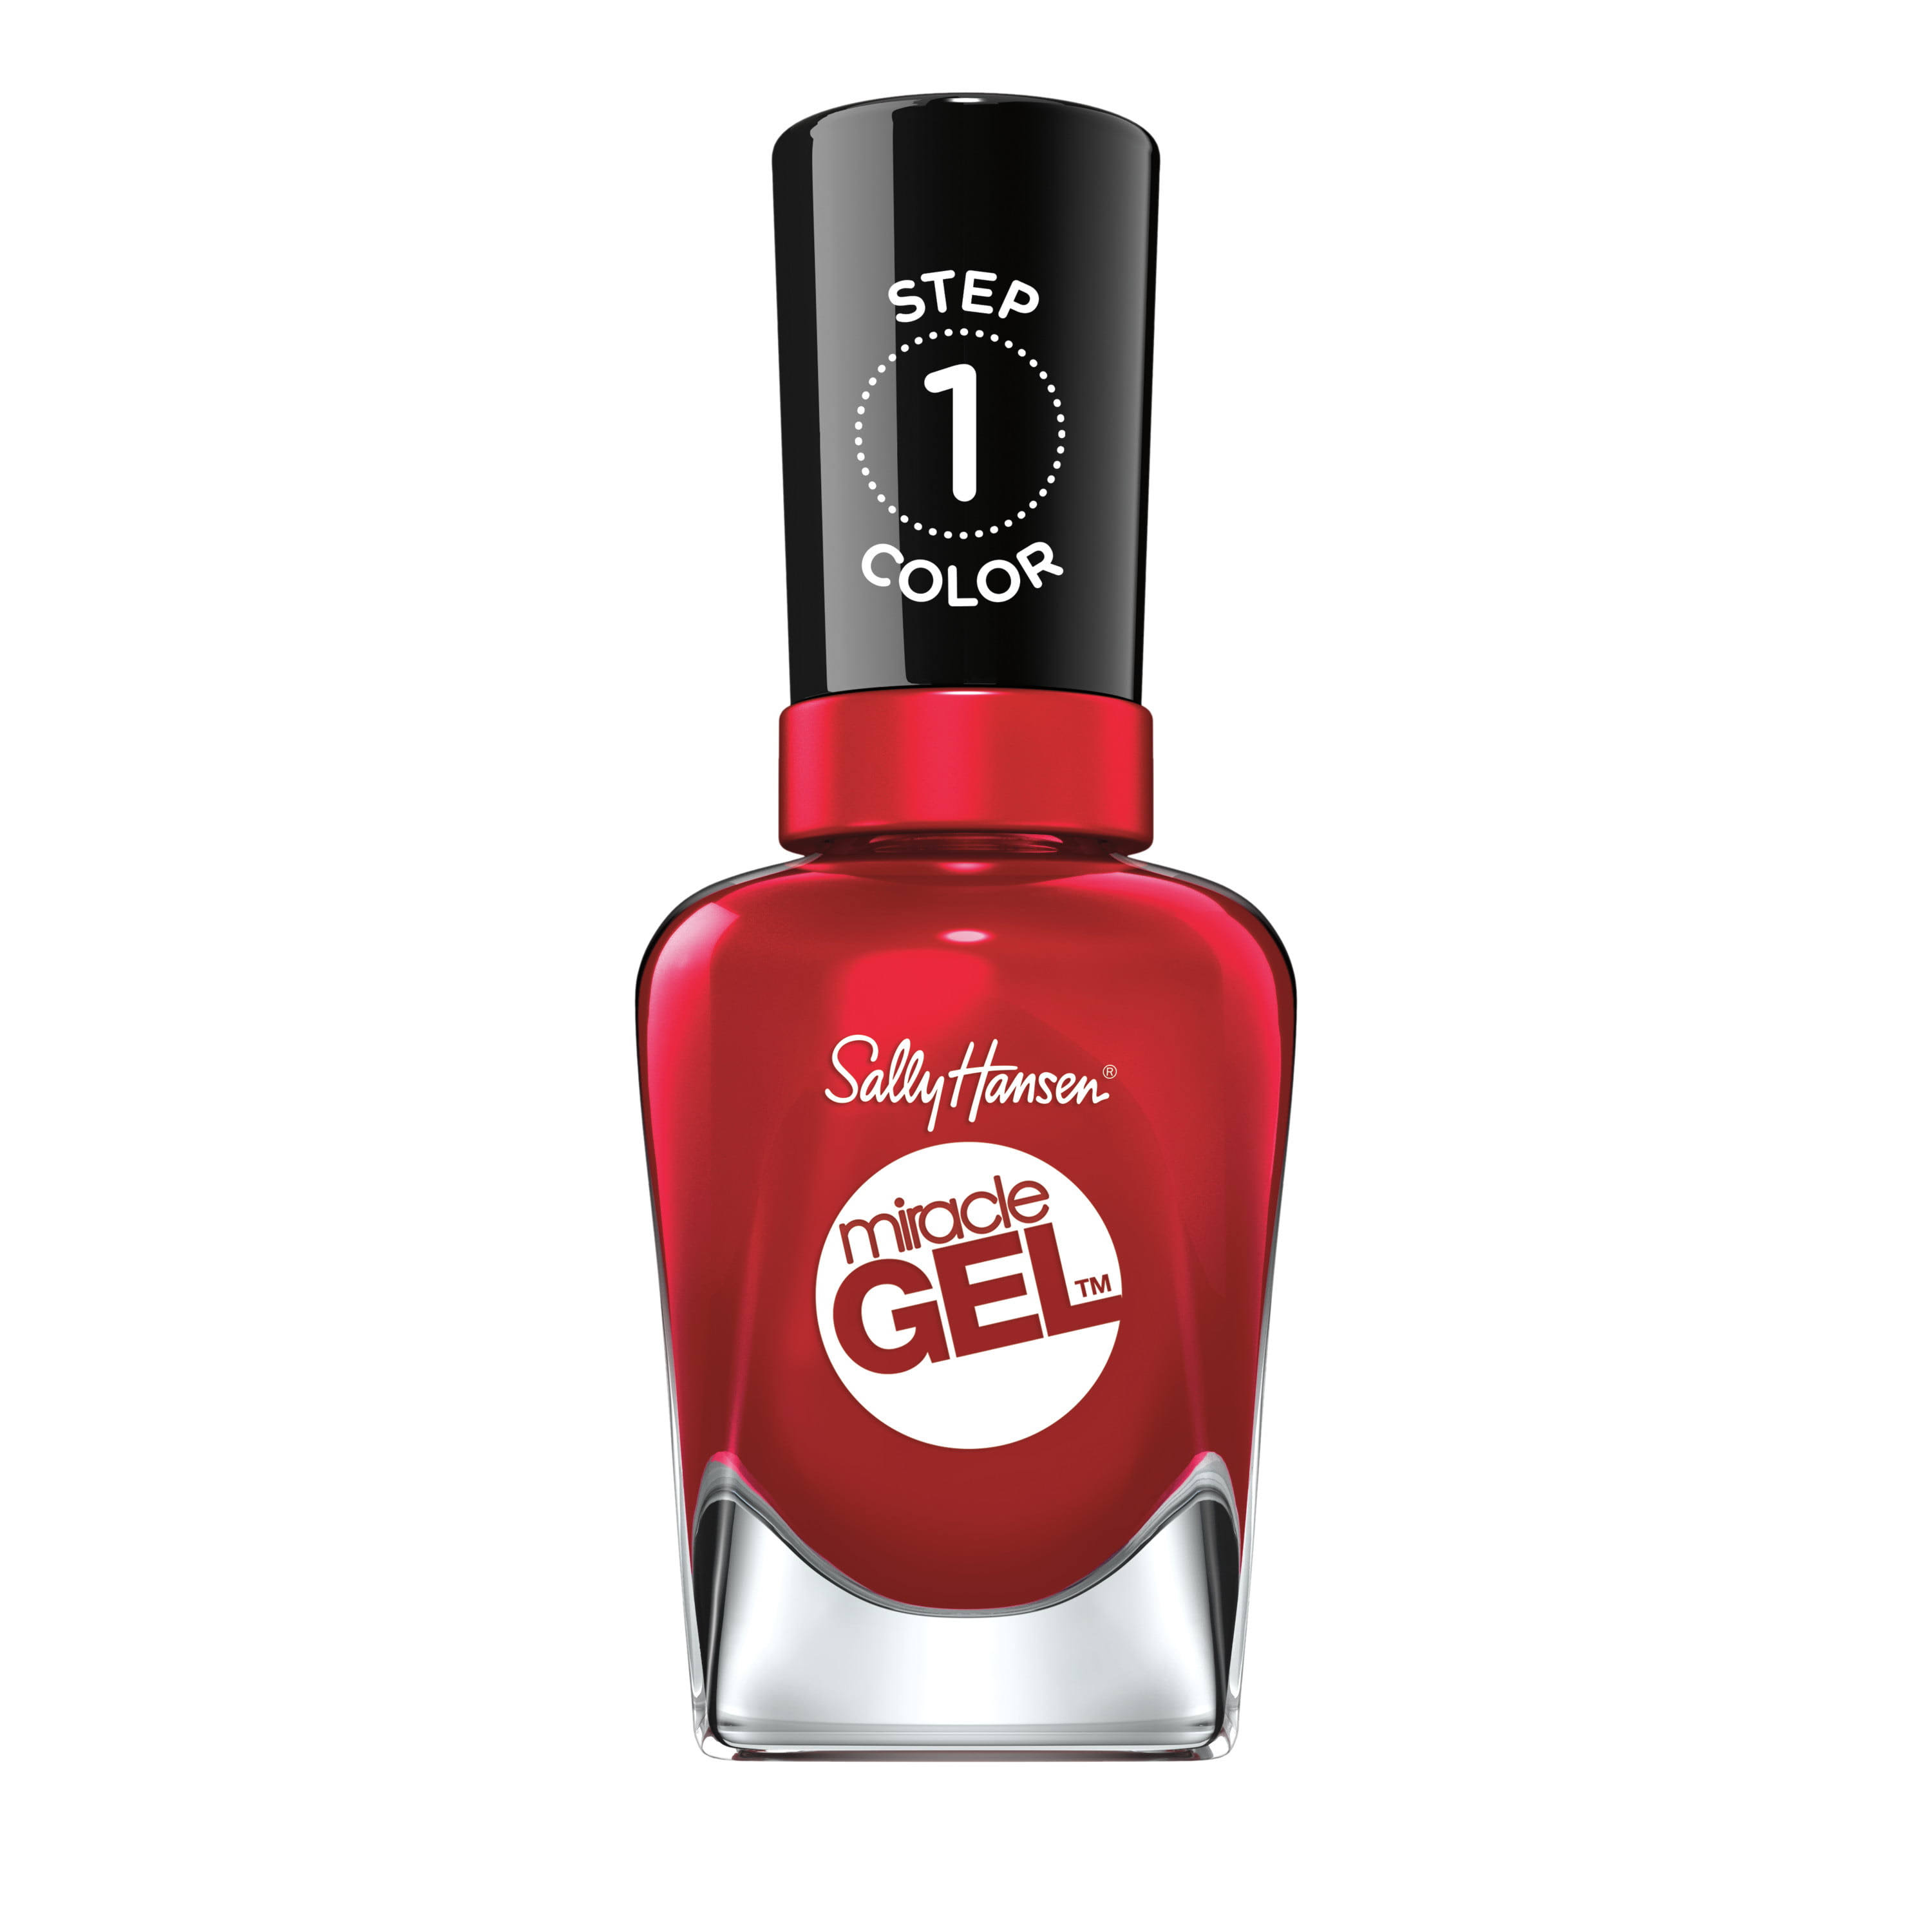 Sally Hansen Miracle Gel Nail Color - Rhapsody Red